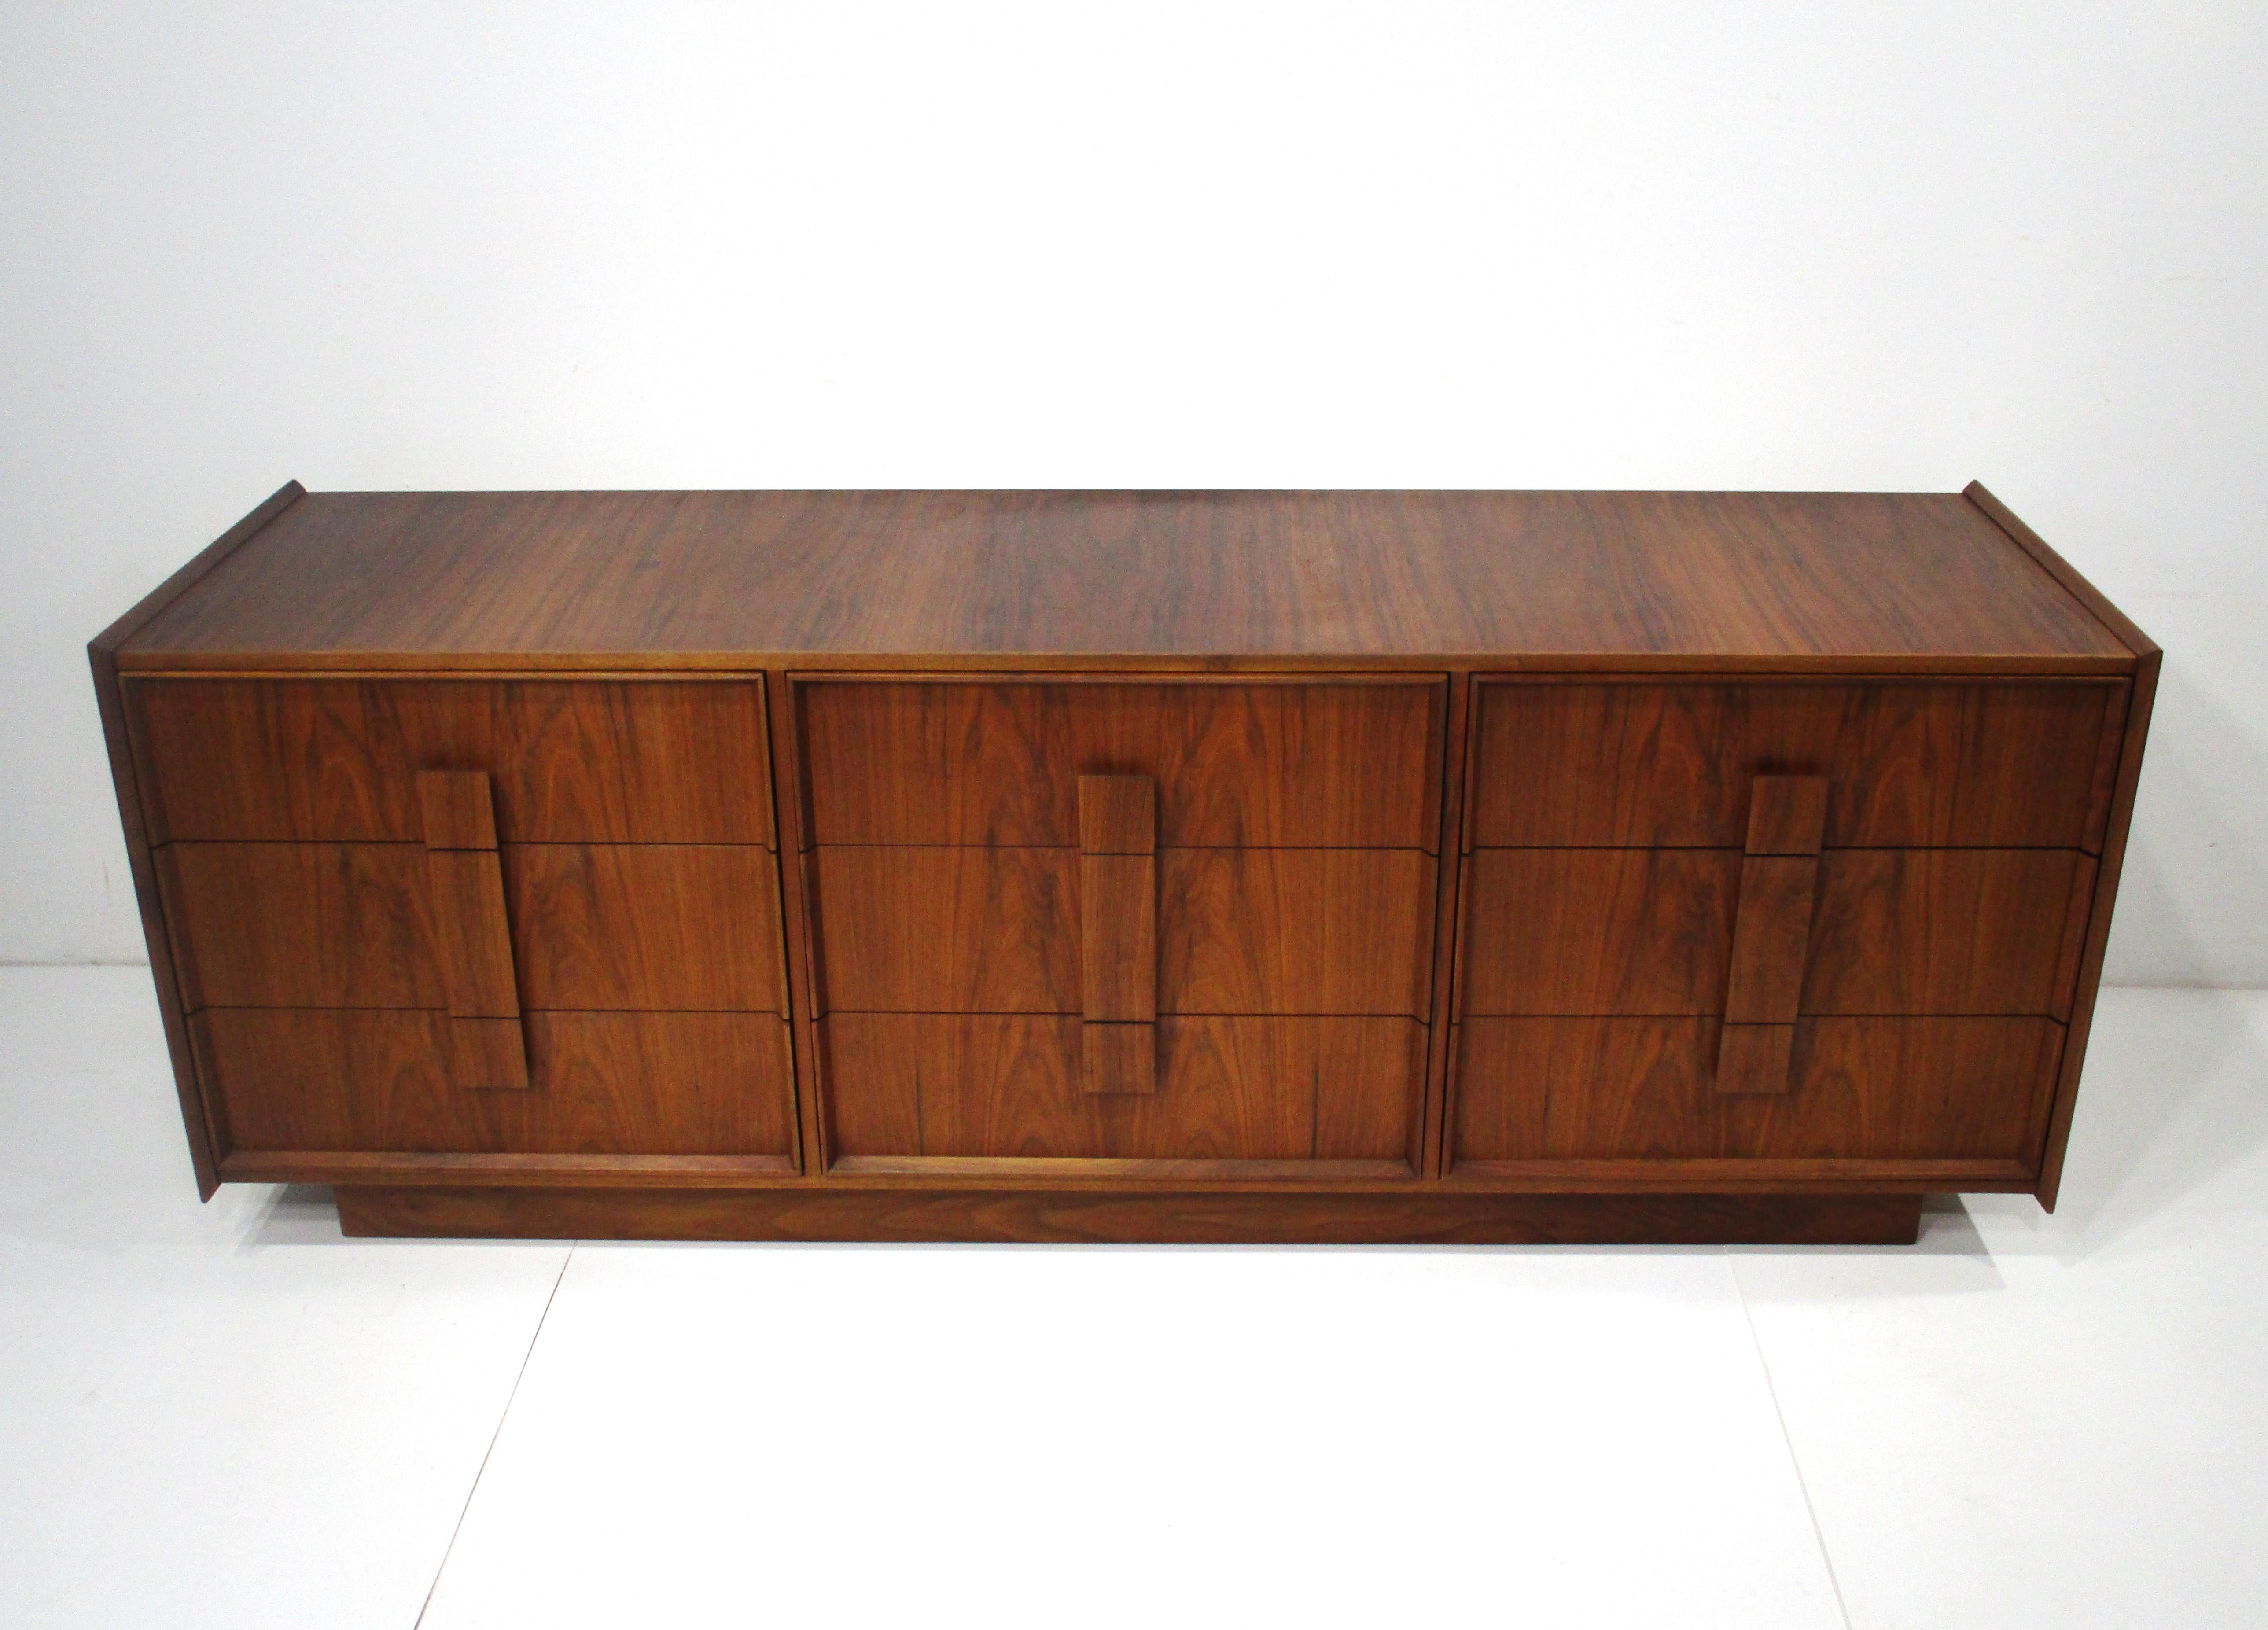 A very well crafted American black walnut nine drawer dresser chest with wonderful book matched flamed graining . The edges of the piece are raised and the squared pulls make opening easy . Designed in the manner of the George Nakashima studio with